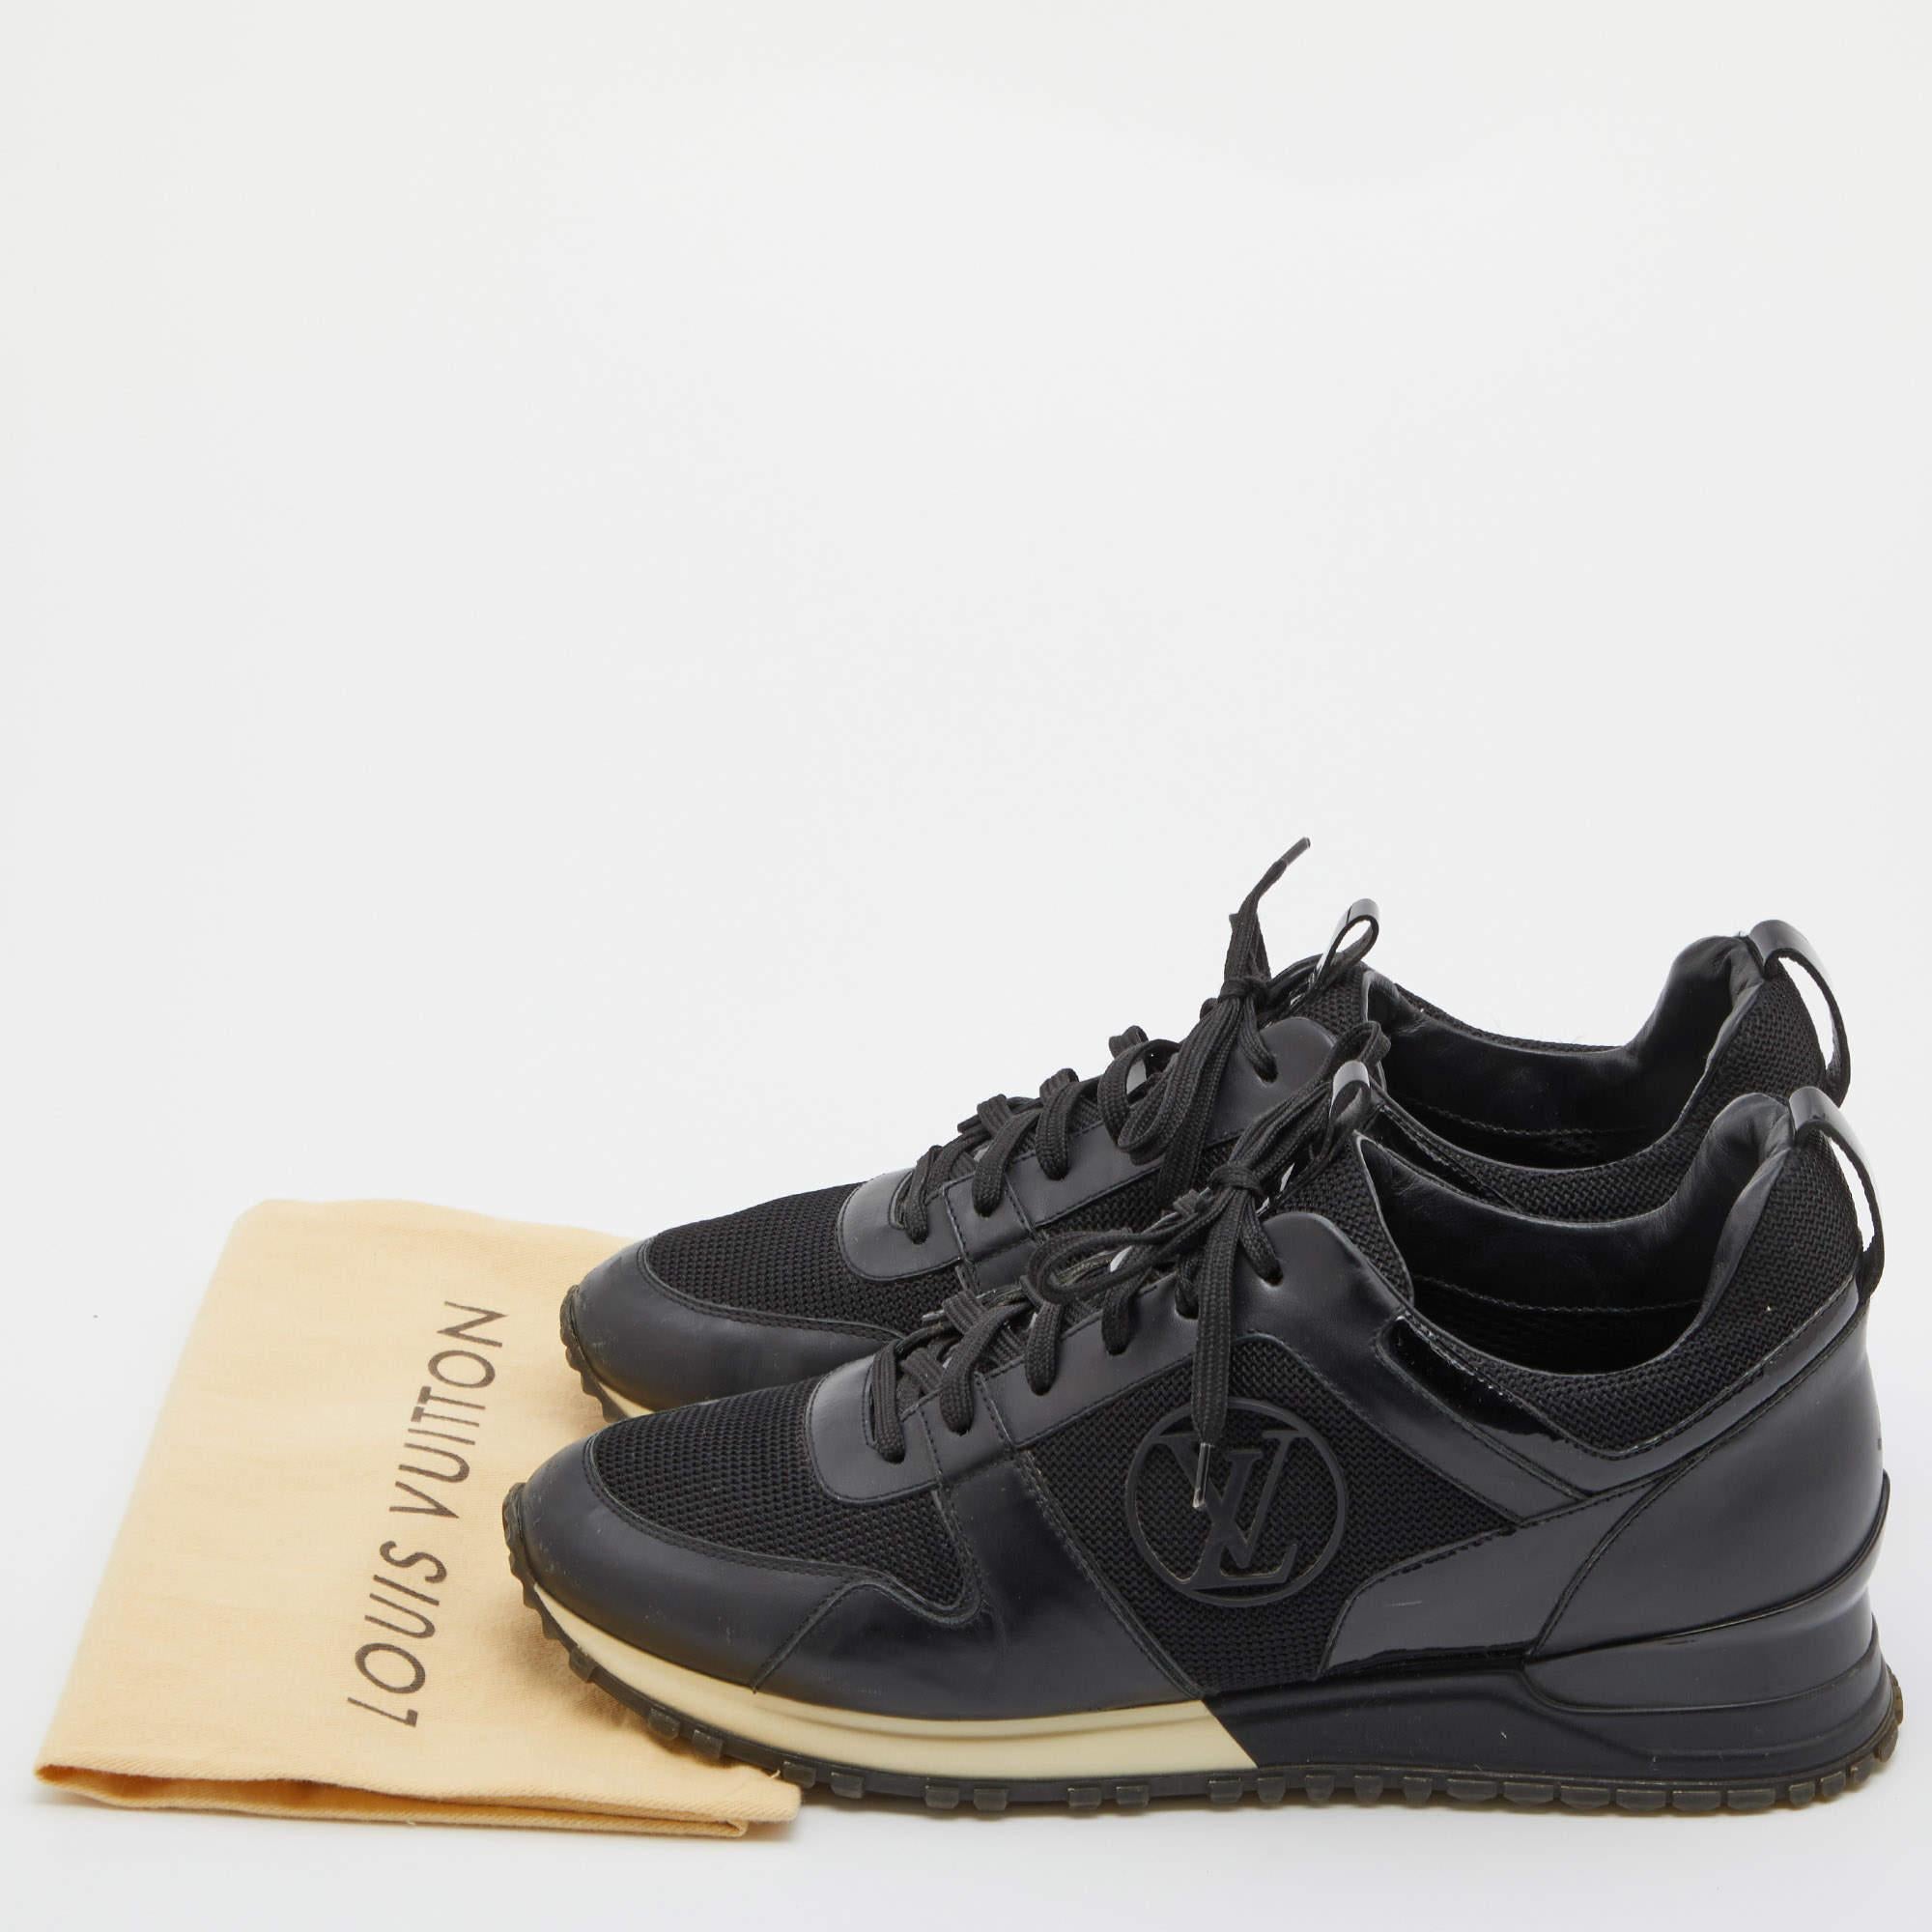 Louis Vuitton Black Leather and Mesh Run Away Sneakers Size 40 3